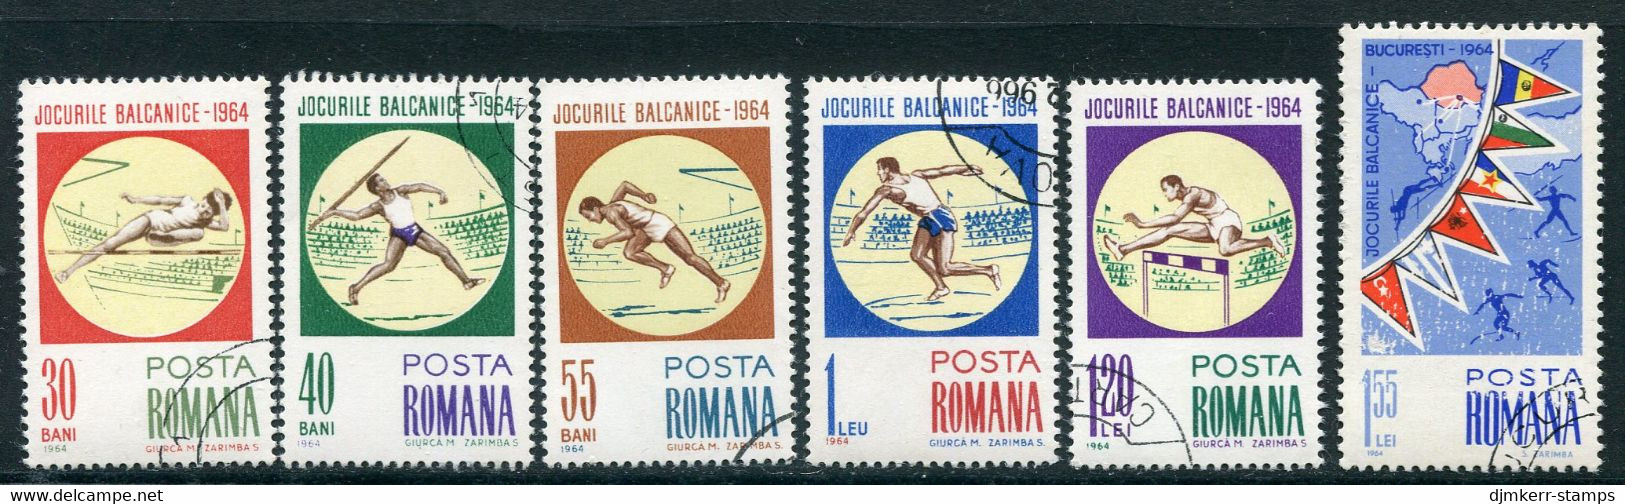 ROMANIA 1964 Balkan Games Set  Used.  Michel 2299-304 - Used Stamps